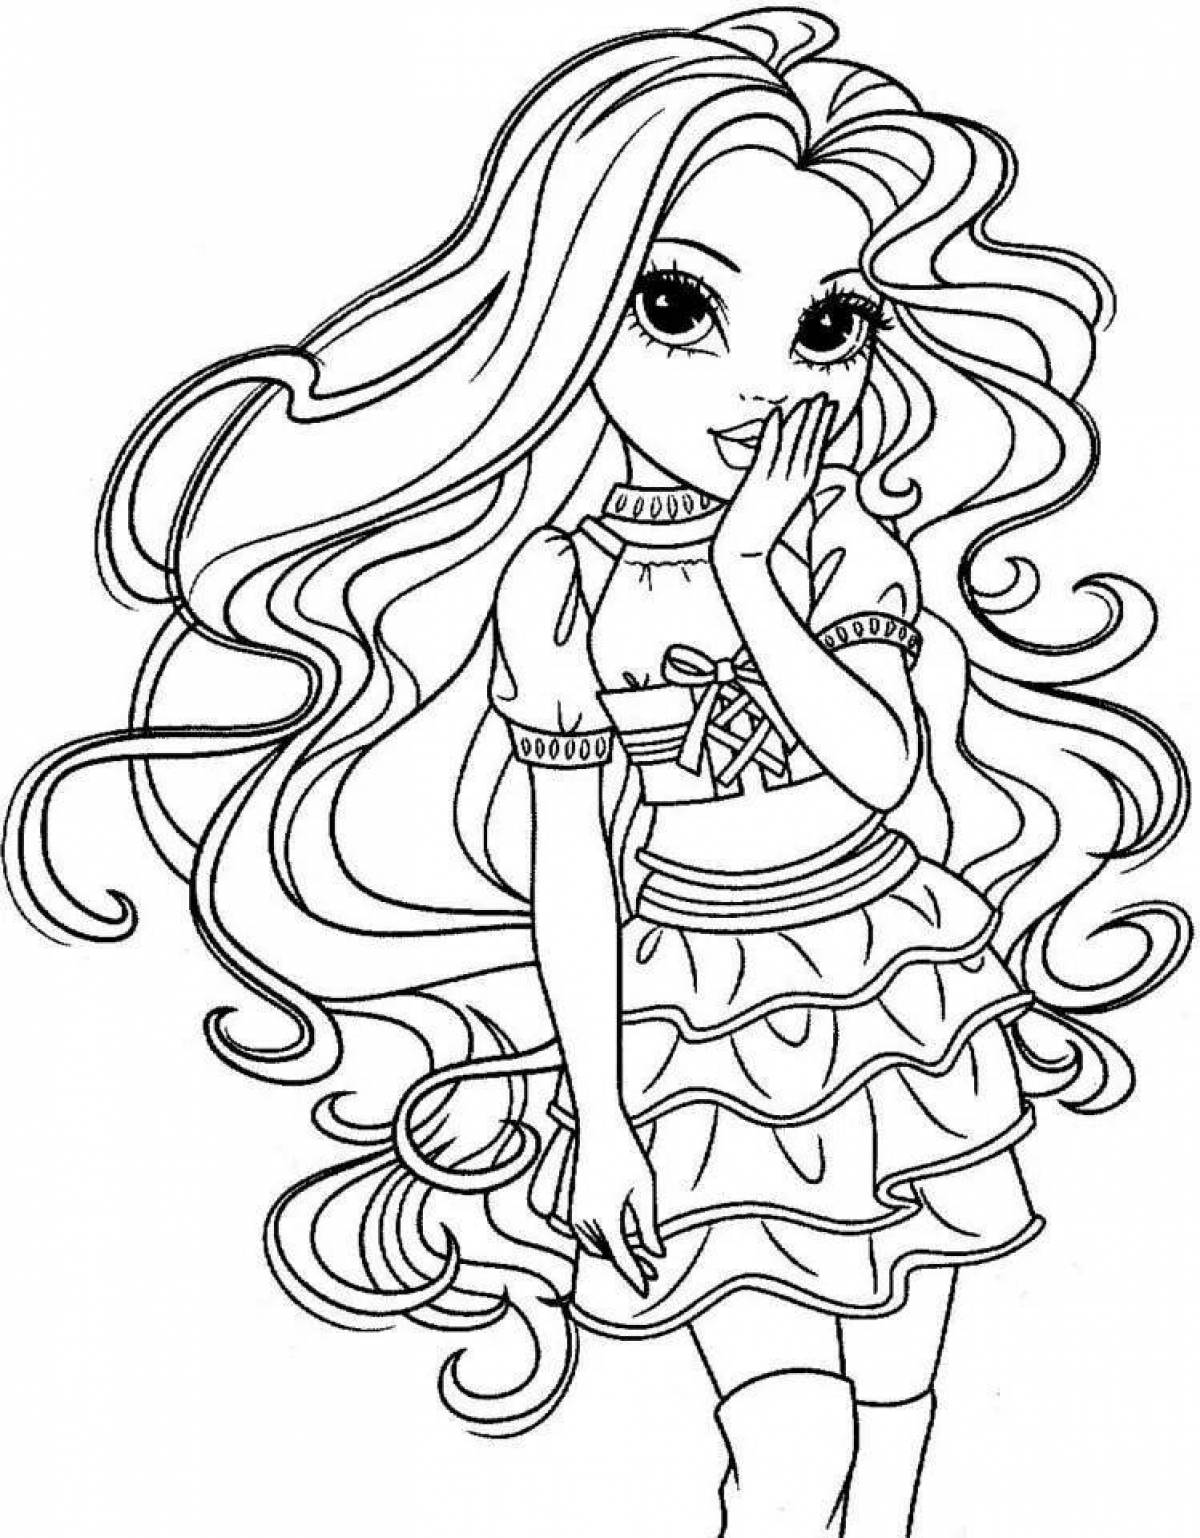 Sparkle coloring book for girls